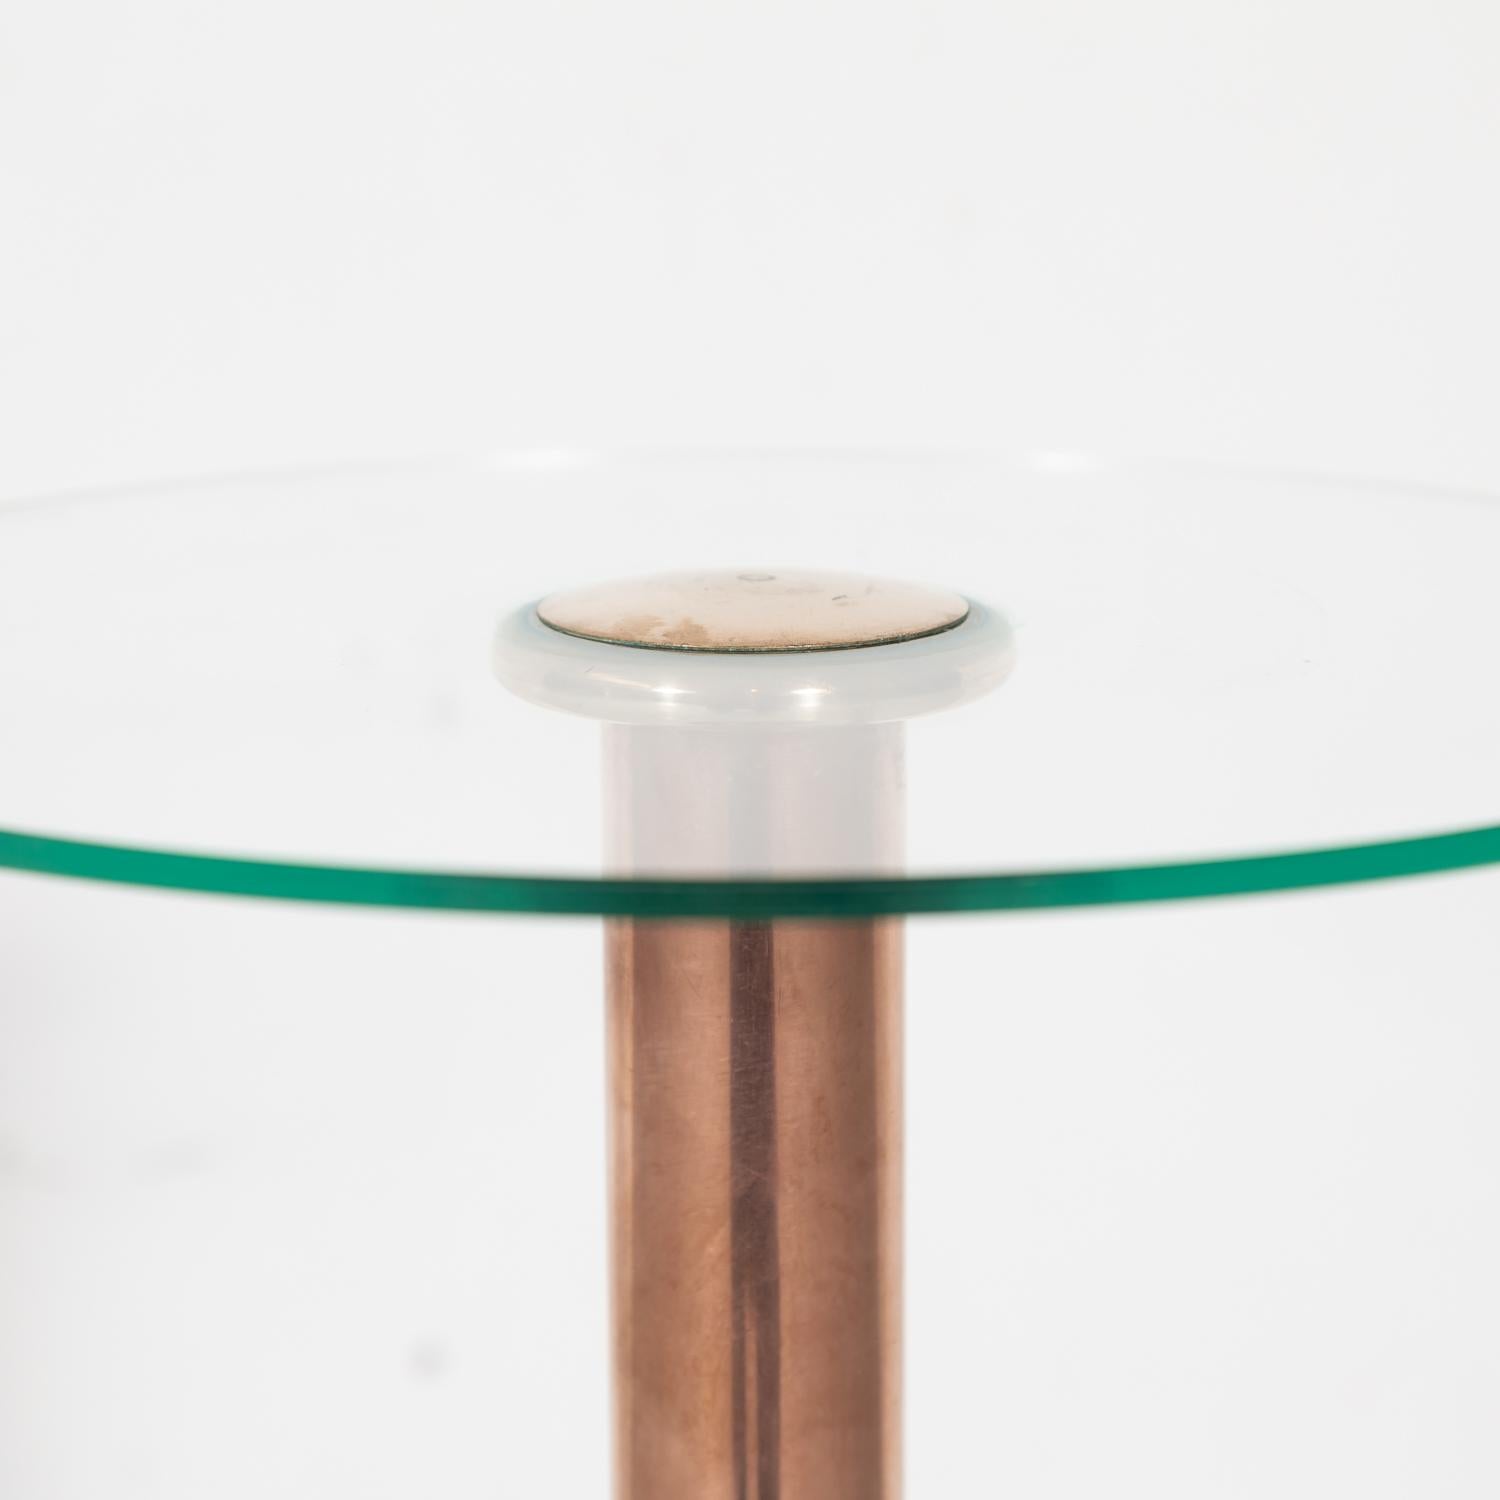 Mid-20th Century French Art Deco Round Glass, Brass, and Copper Drink Occasional or Side Table